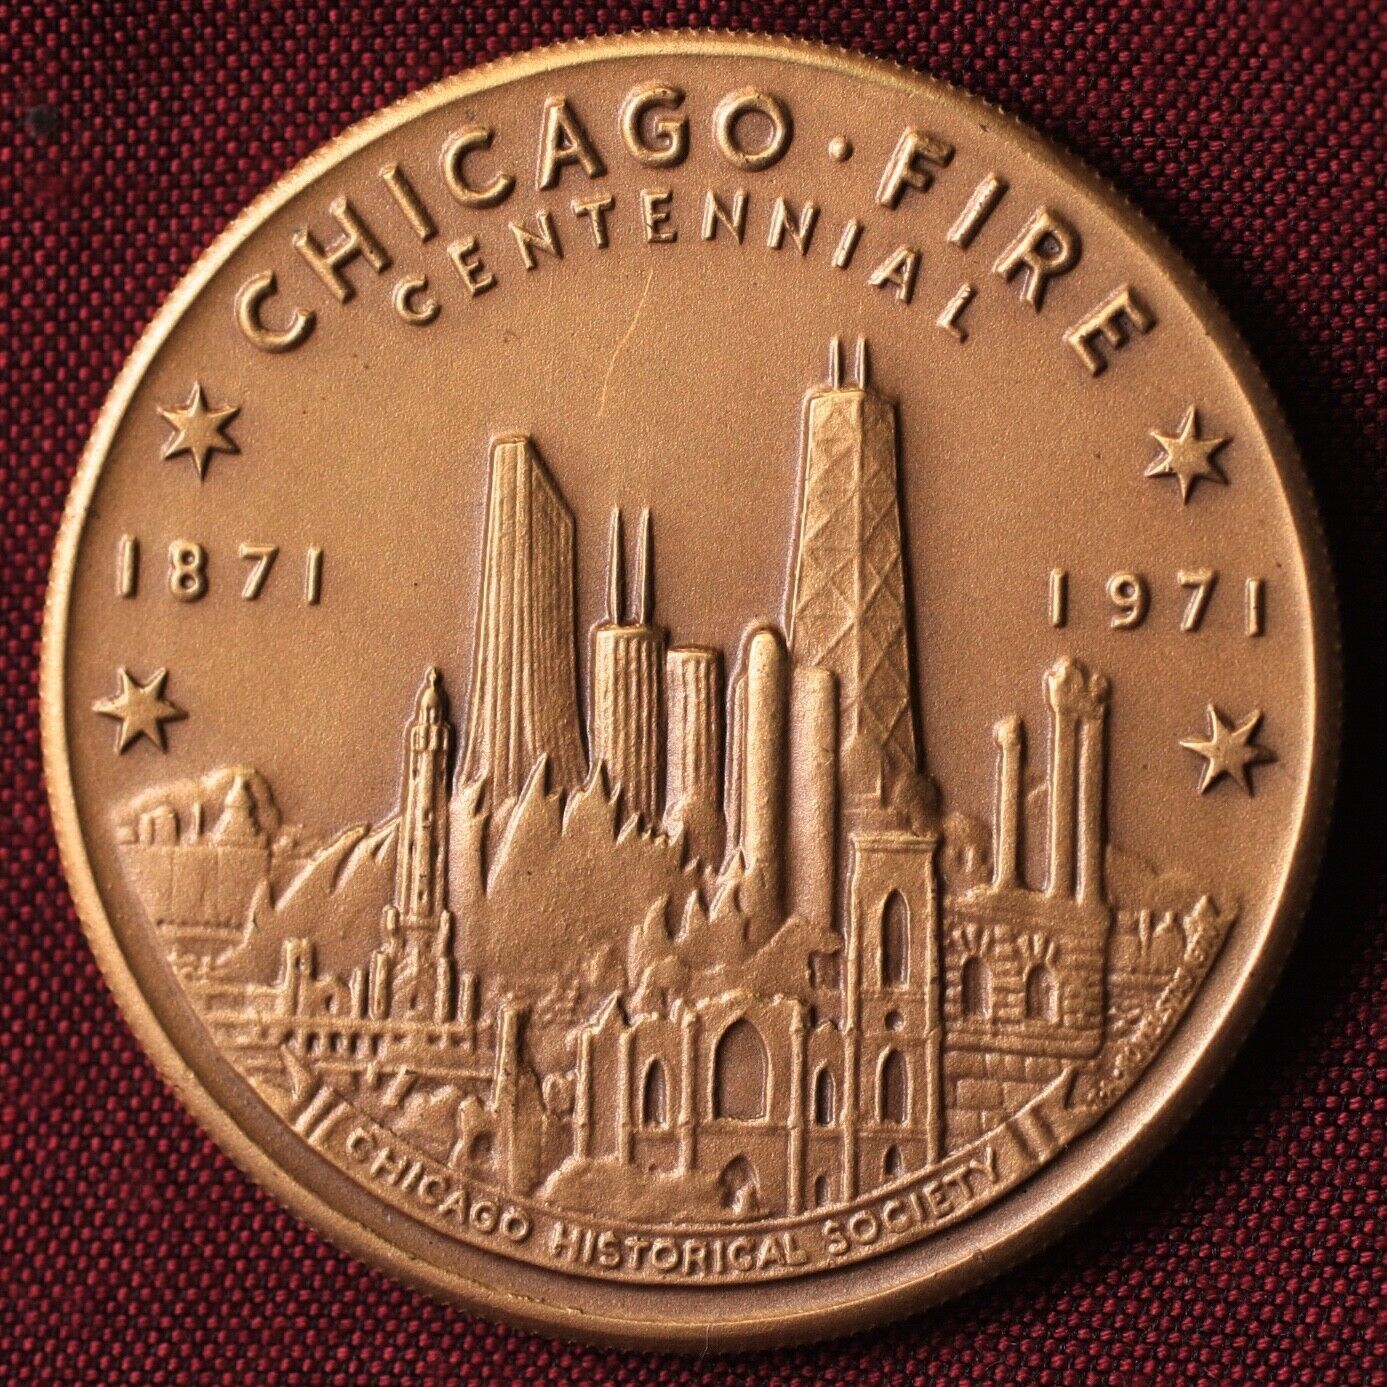 1971 Chicago Fire Centennial City of Chicago, Ill. Historical Society Medallion